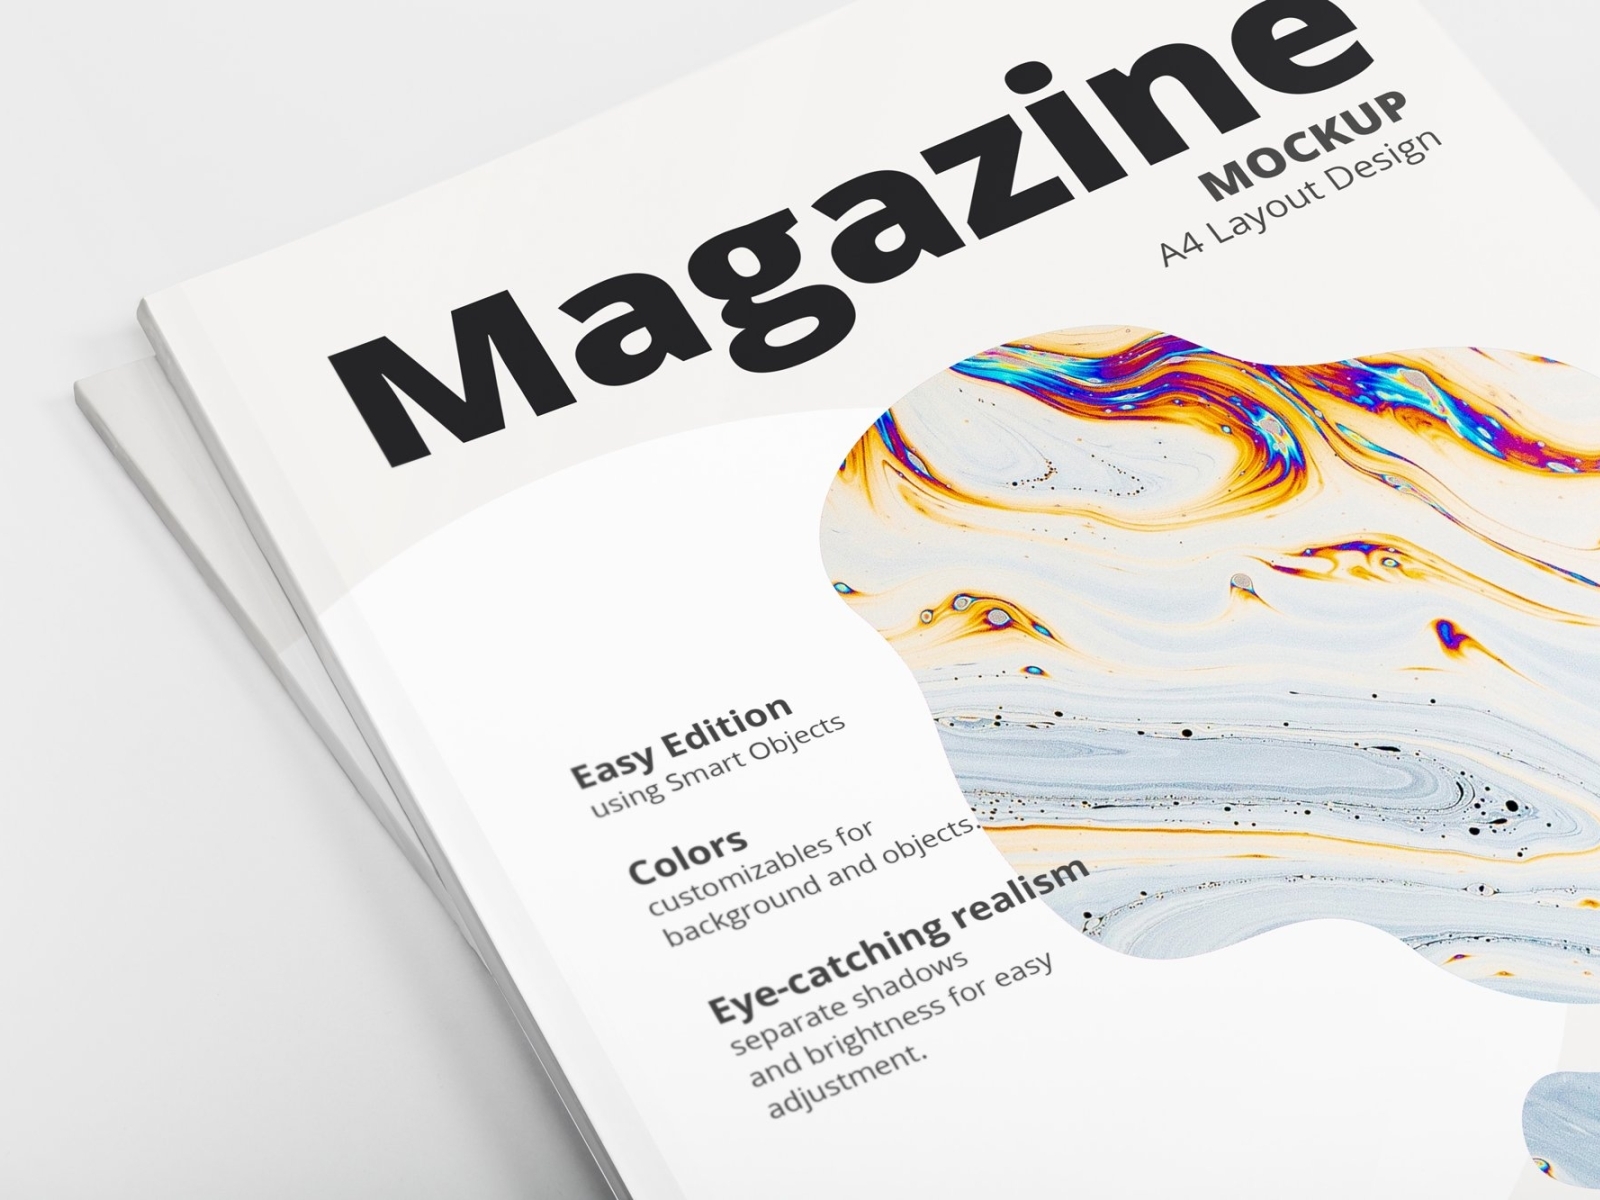 Download A4 Magazine Mockup Pack By Mockup5 On Dribbble PSD Mockup Templates